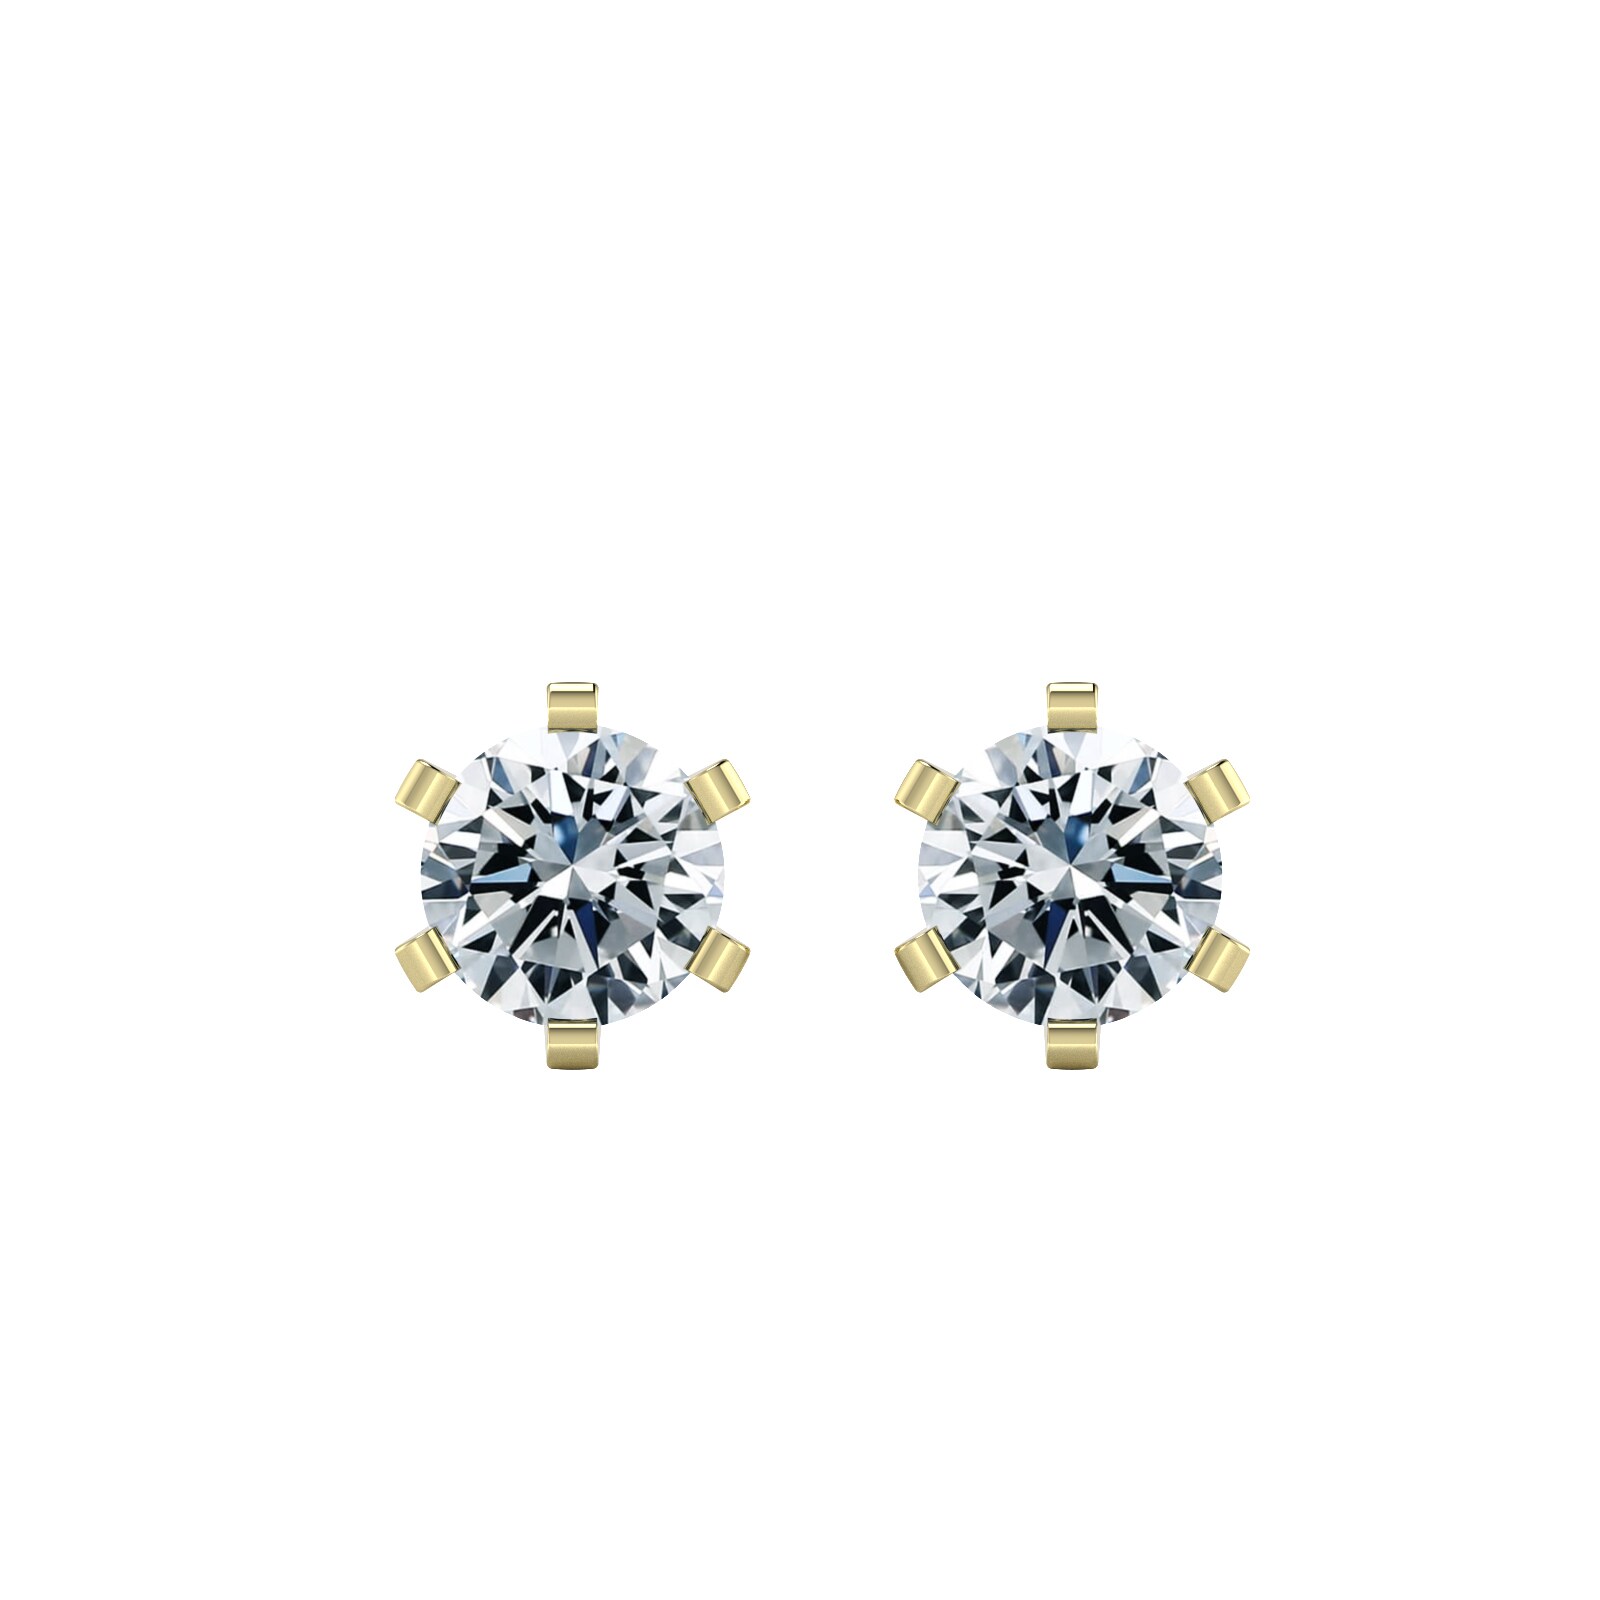 9ct Yellow Gold 0.75cttw Solitaire Diamond Stud Earrings